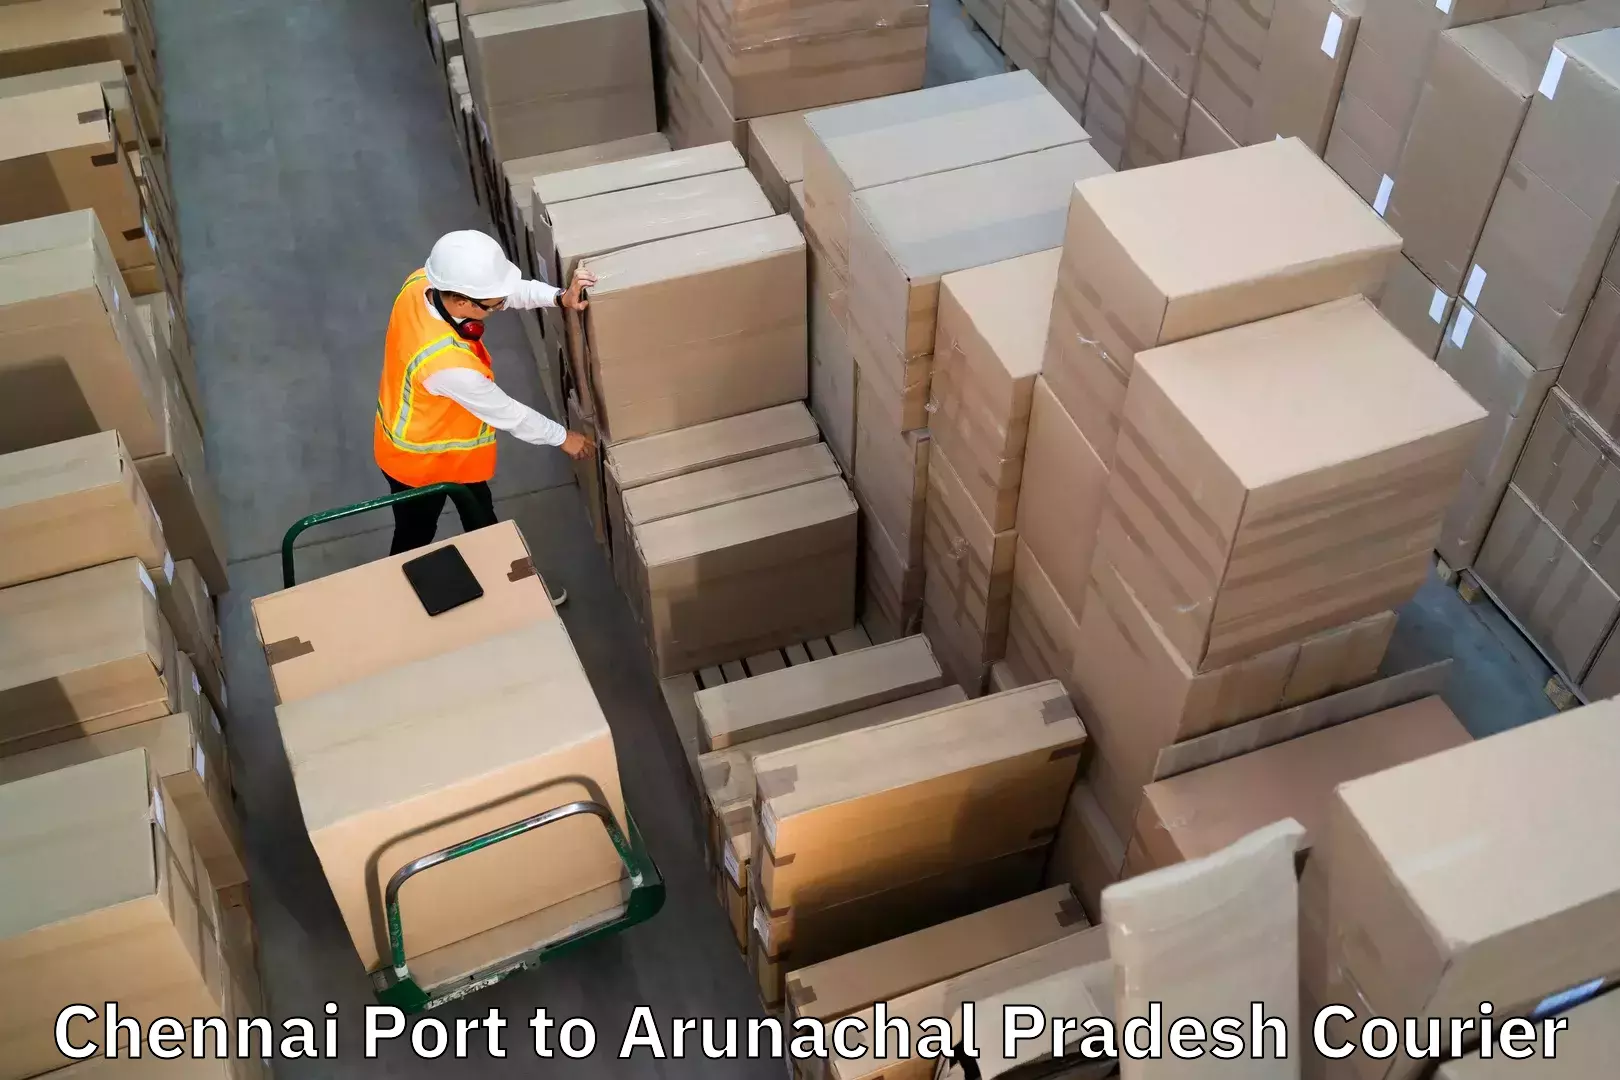 Baggage transport professionals Chennai Port to Changlang